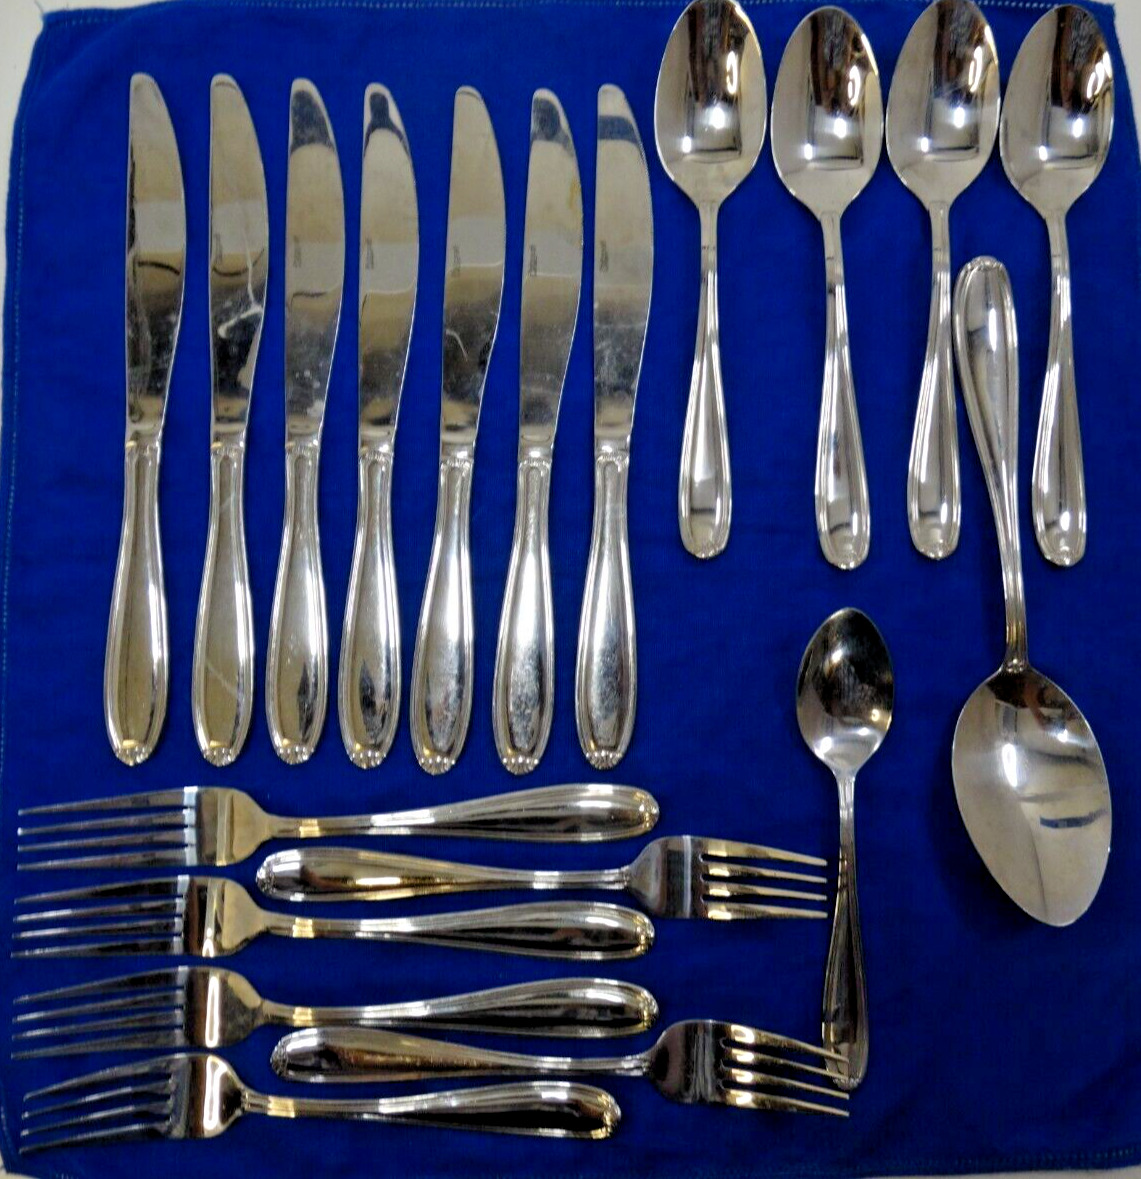 Pfaltzgraff Linden Glossy Stainless Steel Flatware Lot of 19  Pieces